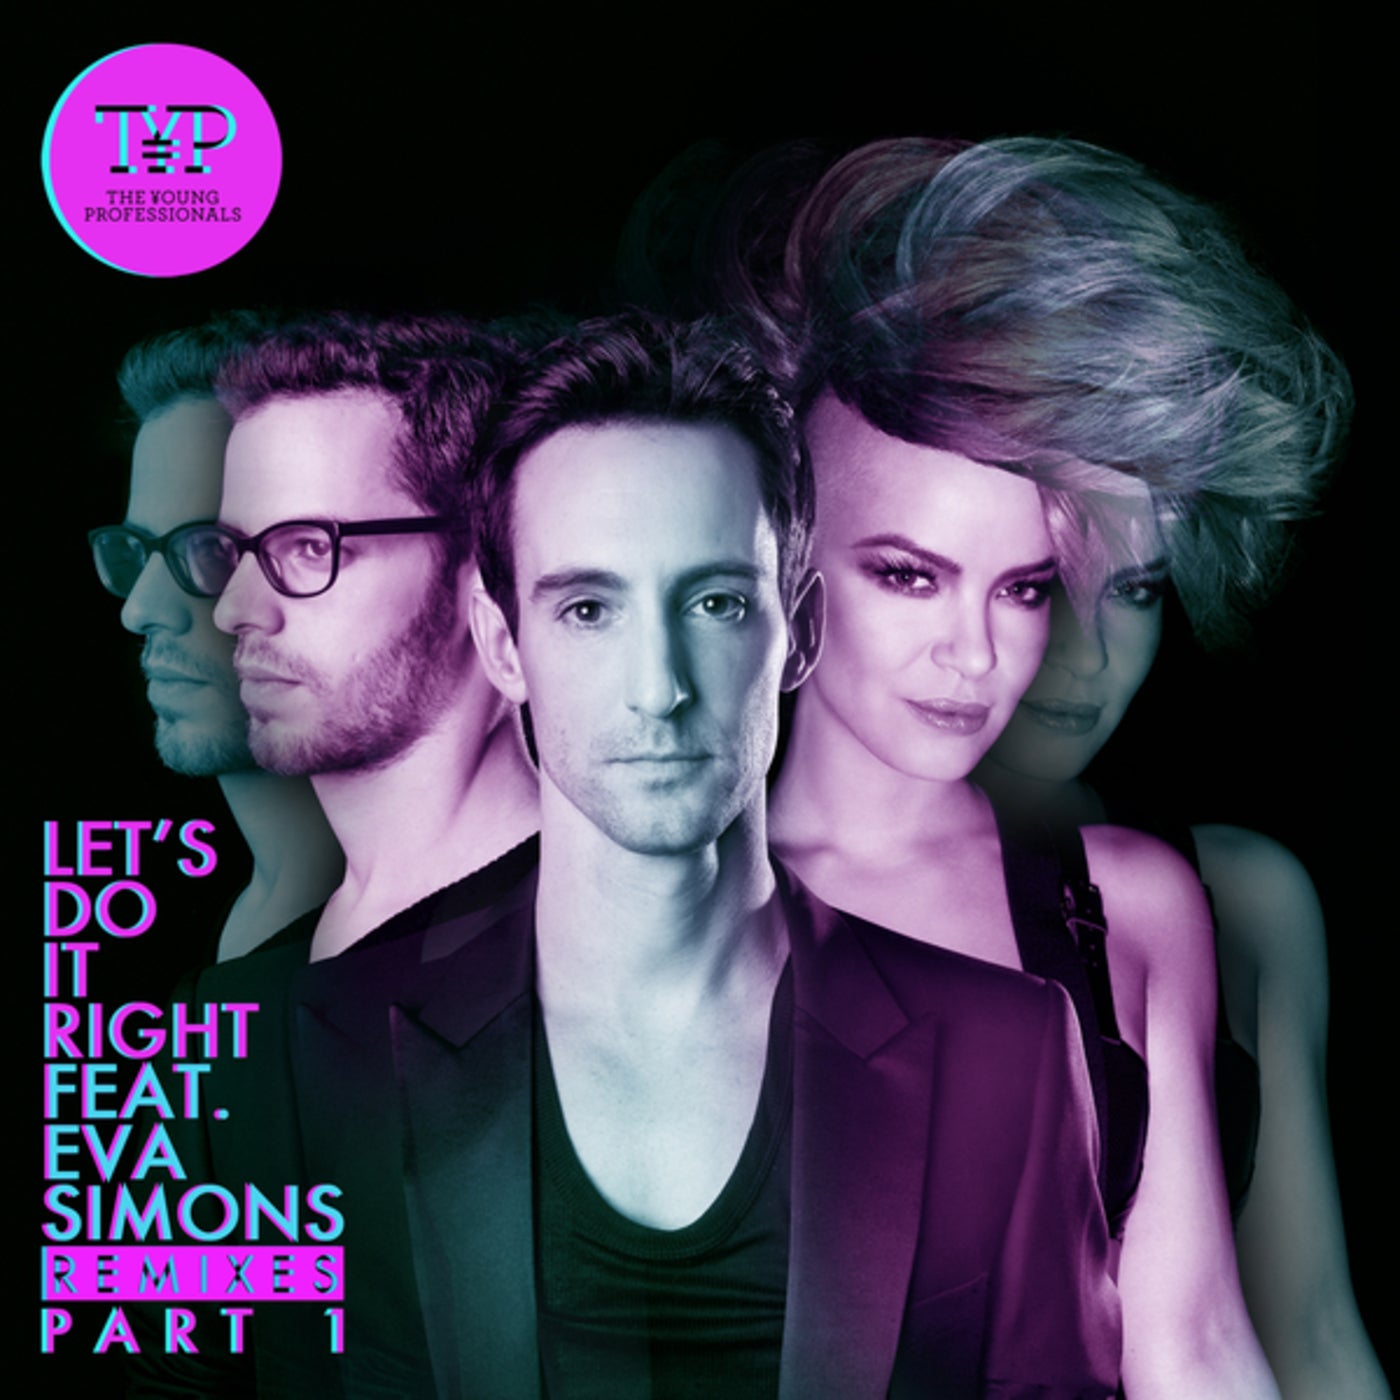 Let's Do It Right by Eva Simons and The Young Professionals on Beatsource